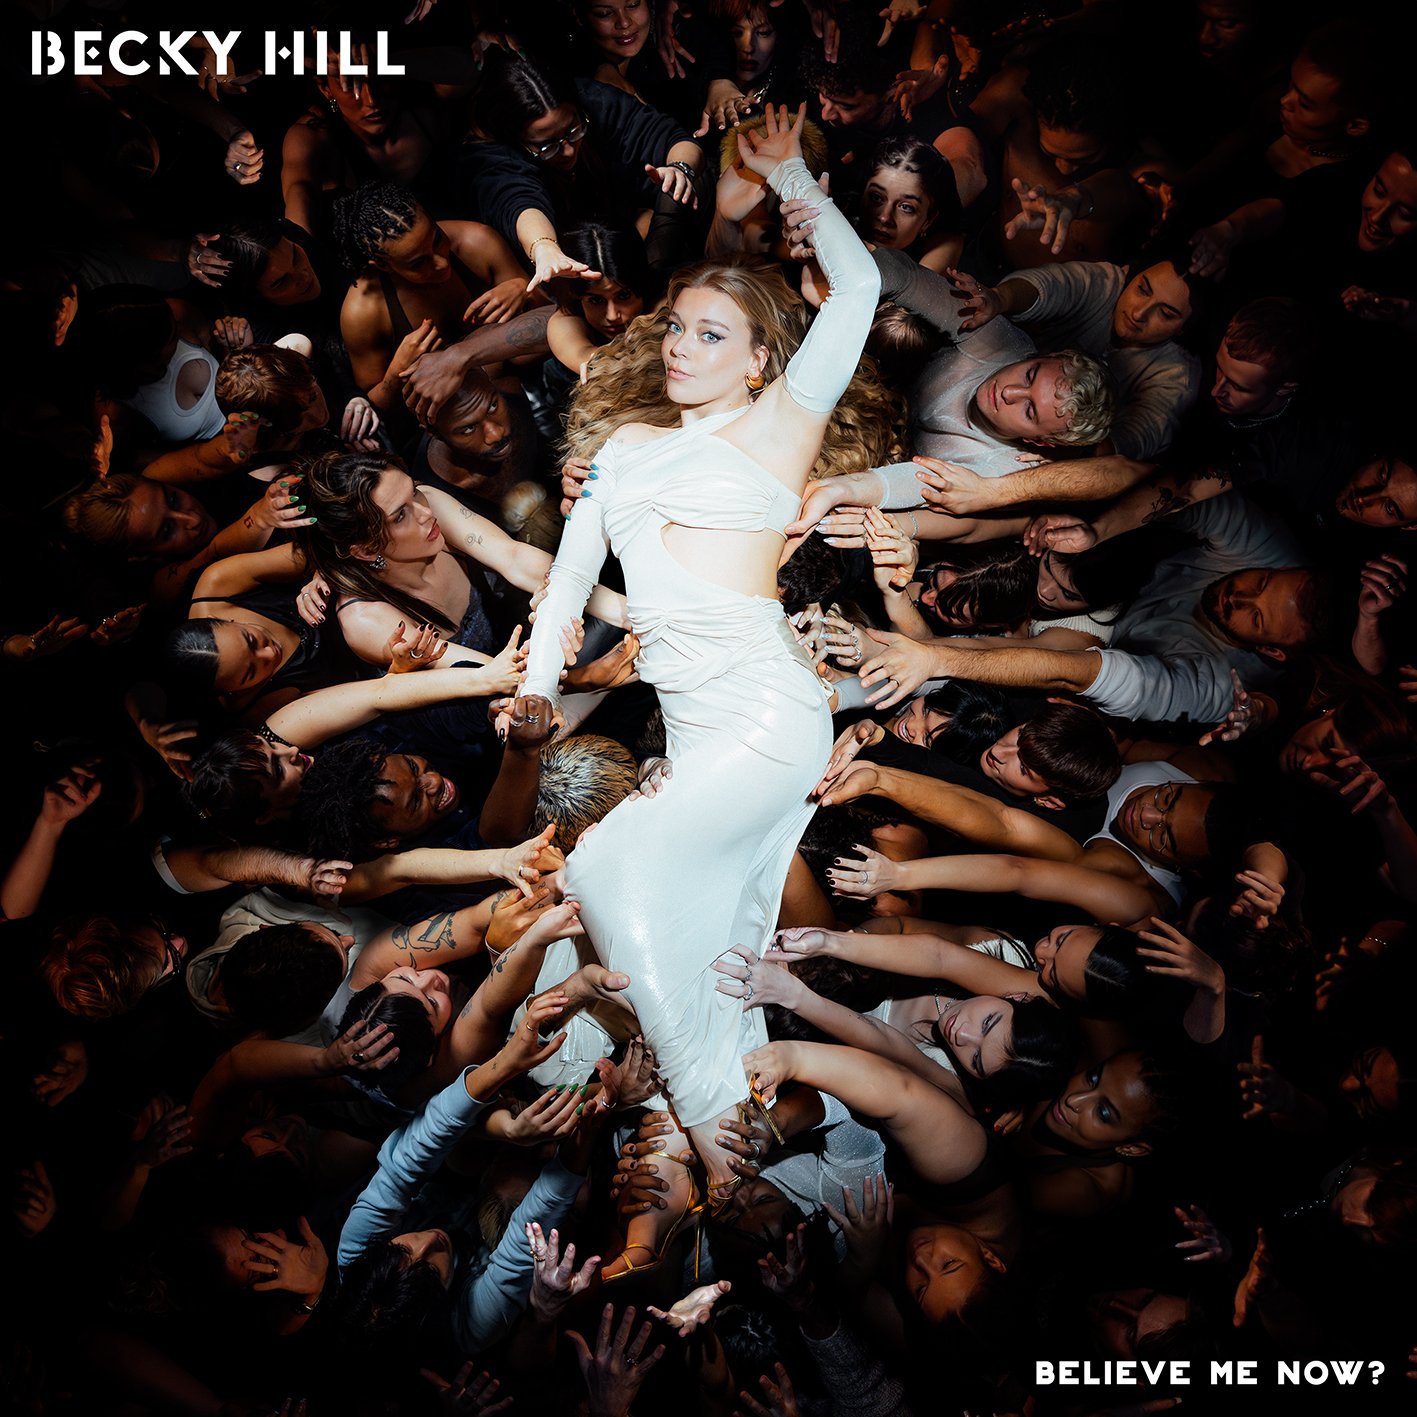 Becky Hill's New Album 'Believe Me Now' To be released May 31 via Astralwerks